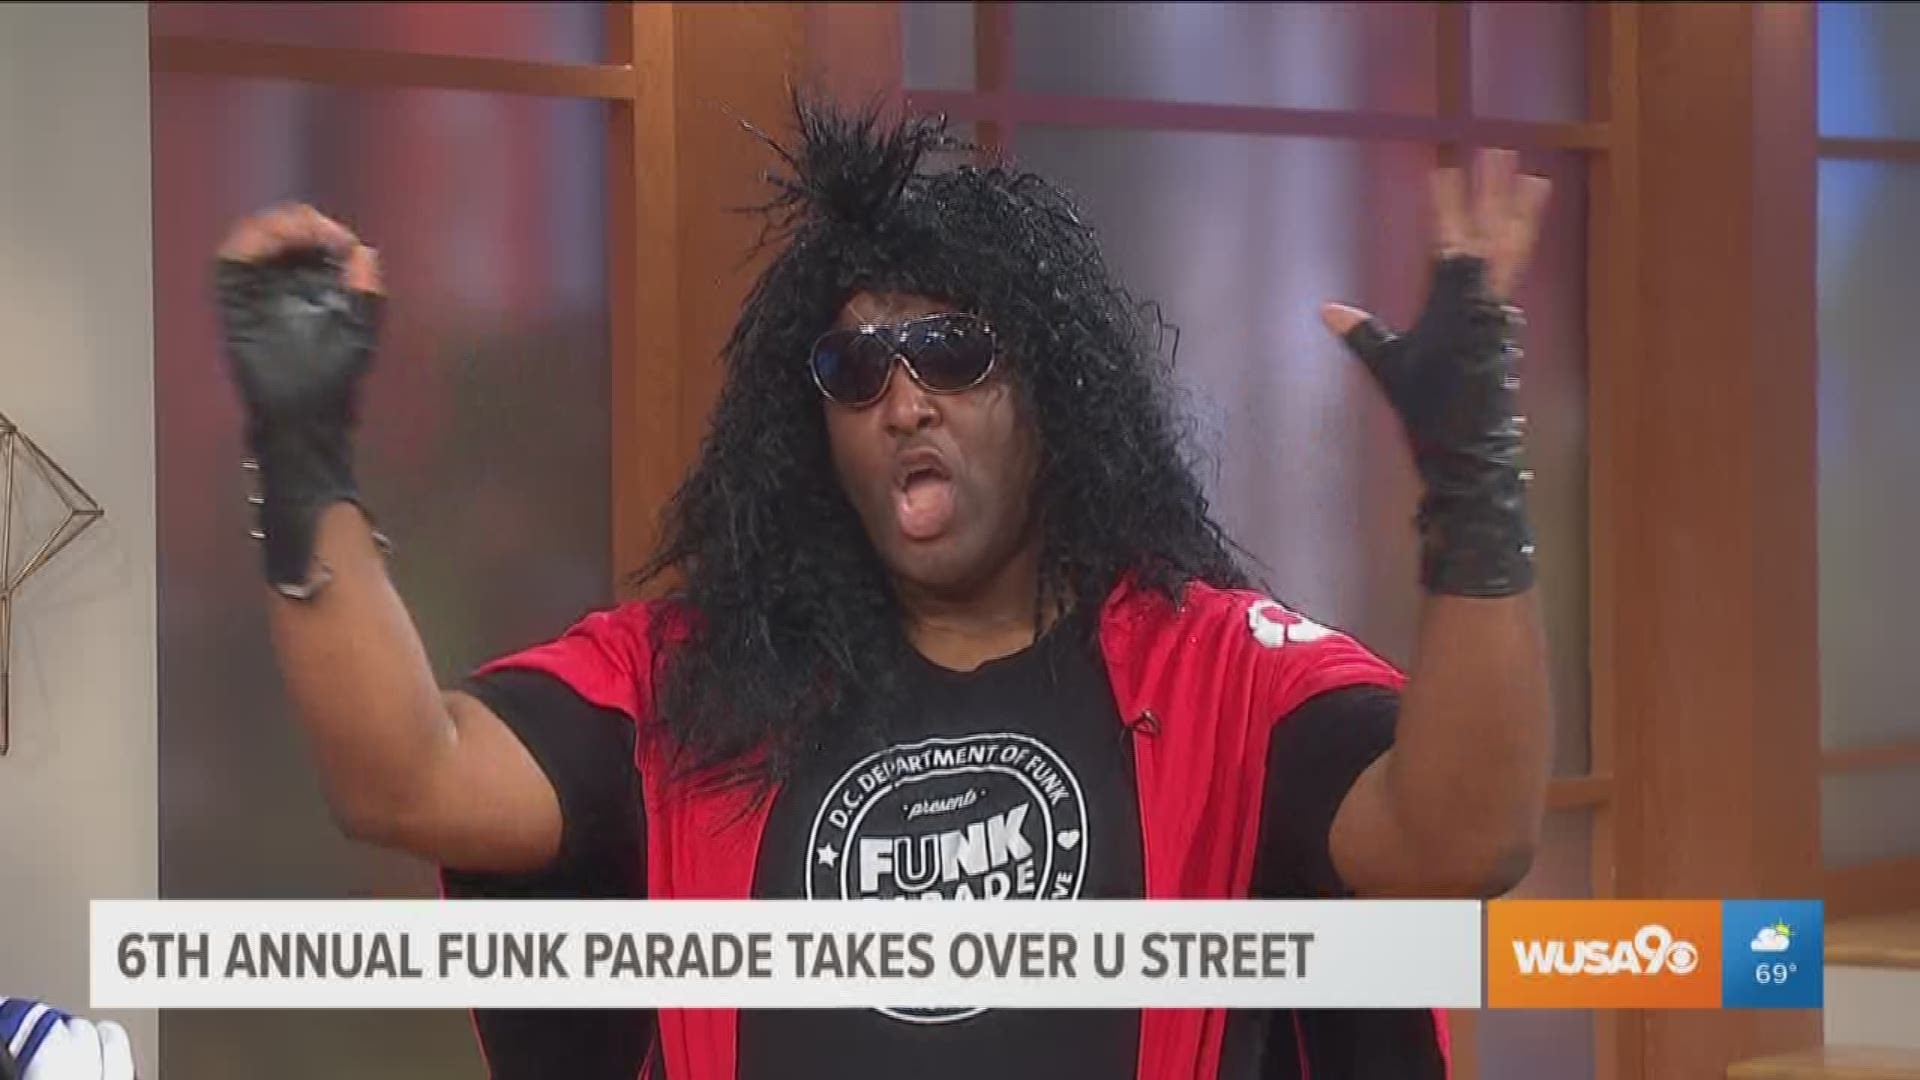 The funk parade is a one-of-a-kind fair, parade and festival that celebrates DC's vibrant music and arts scene.  David "The Oh" Oliver gives Markette the low down and is joined by Kenneth "Rollo" Davis who is the CEO of Rolloway Productions.